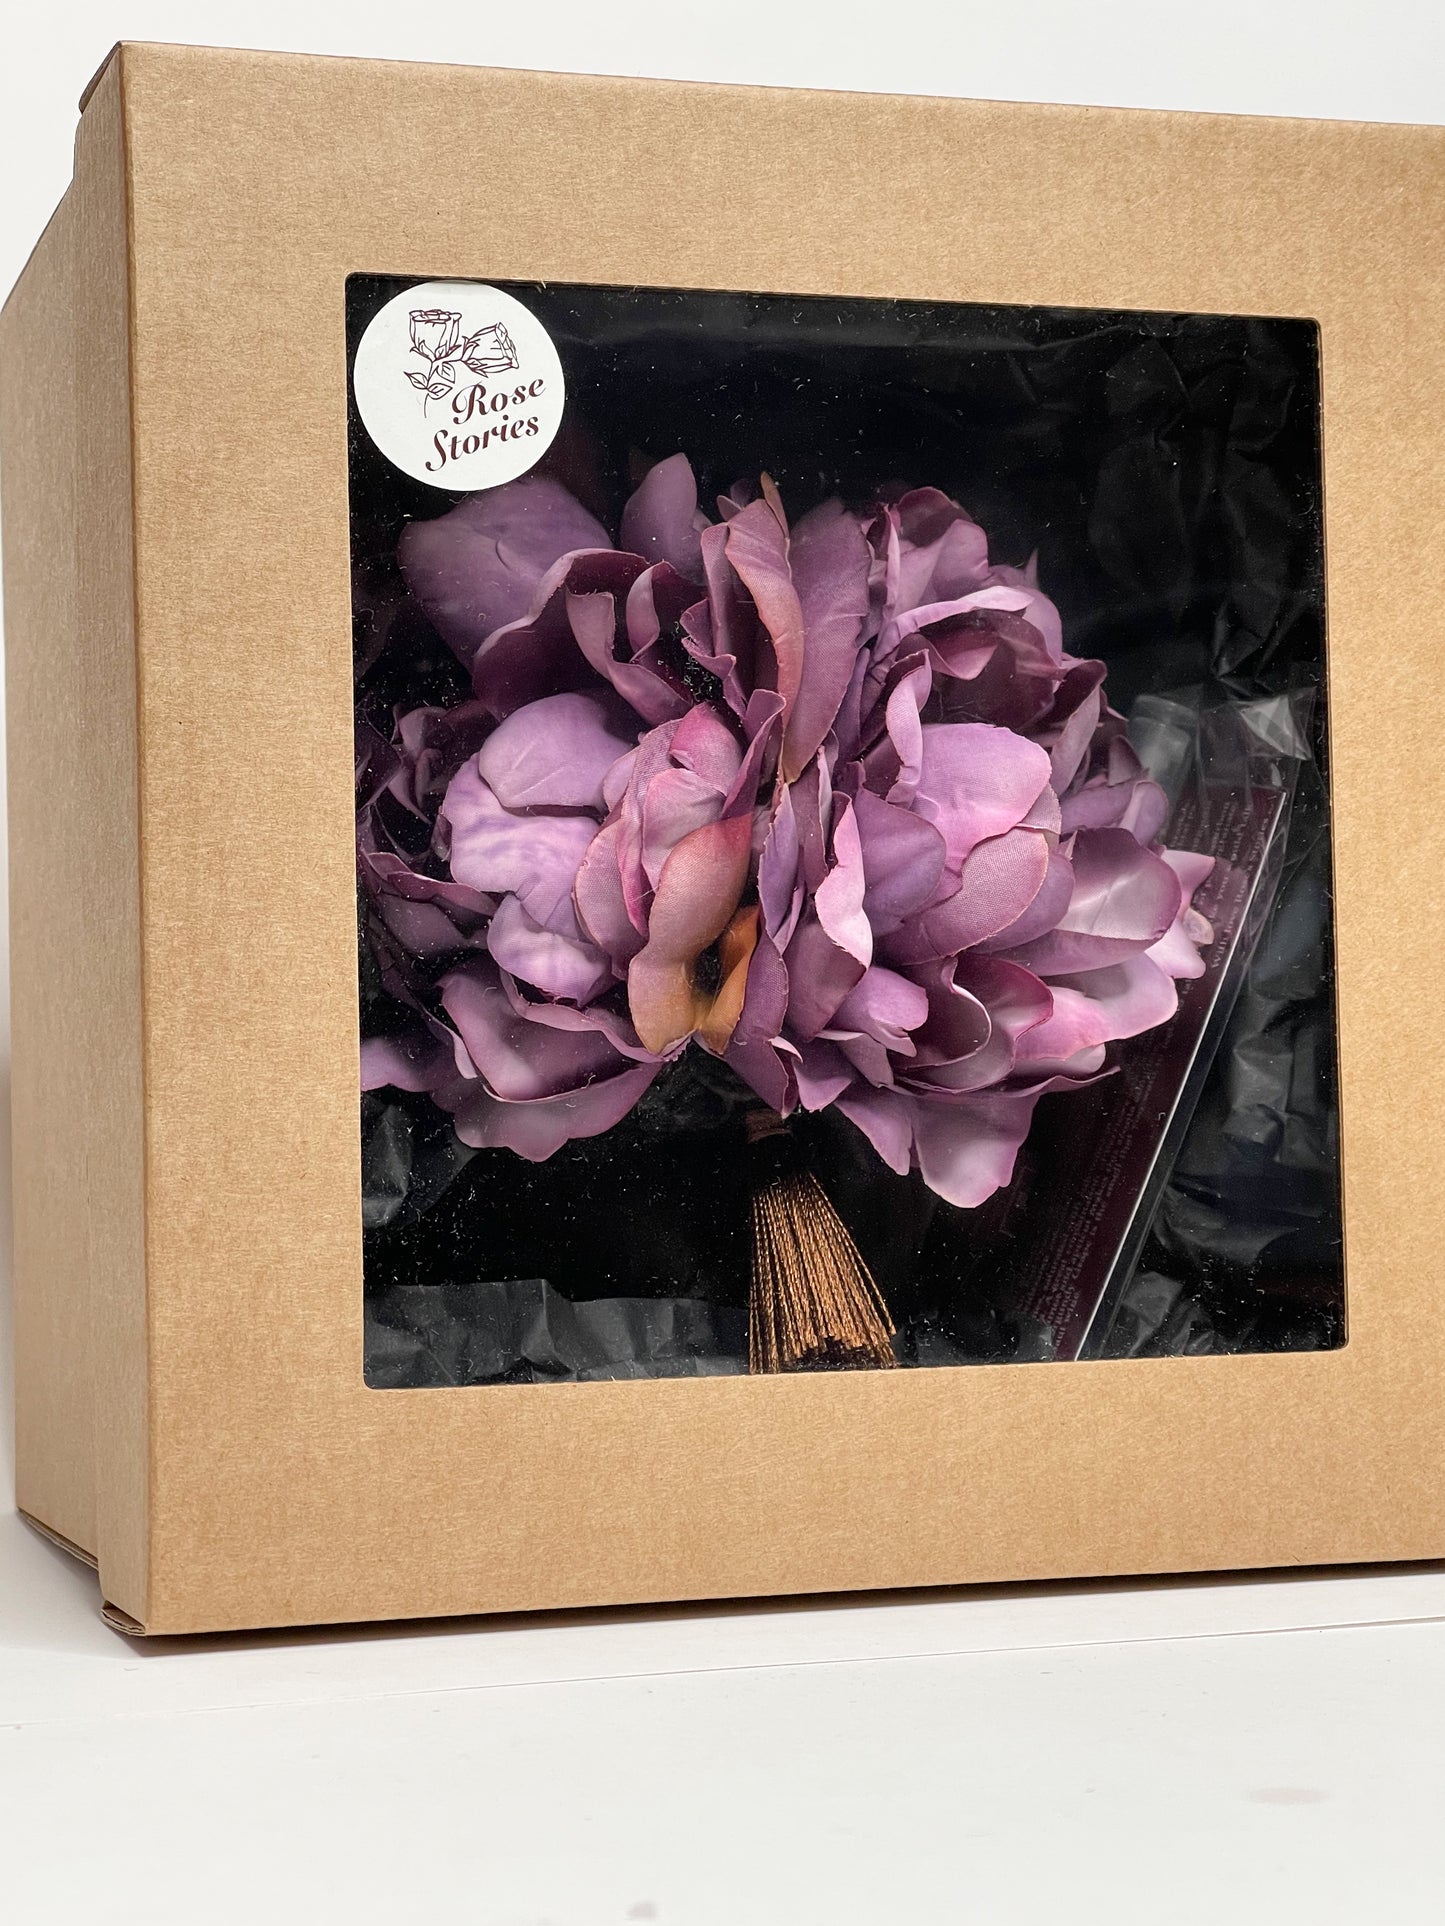 Home fragrance "Bordeaux peonies in a brown basket"